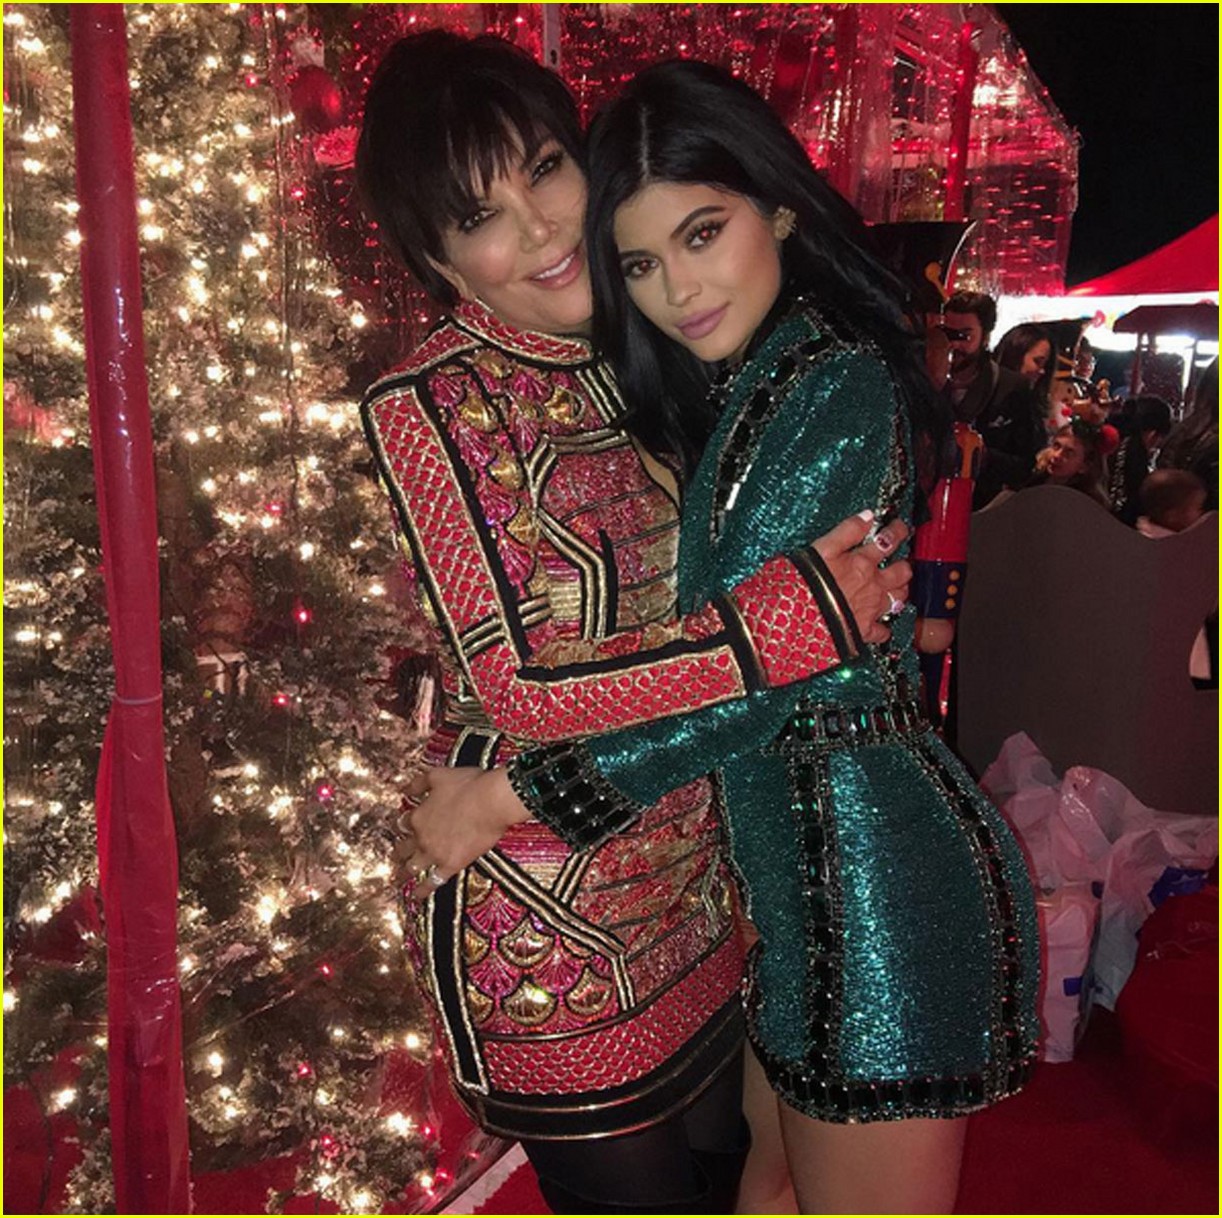 kylie jenner at 2015 kris christmas party 01